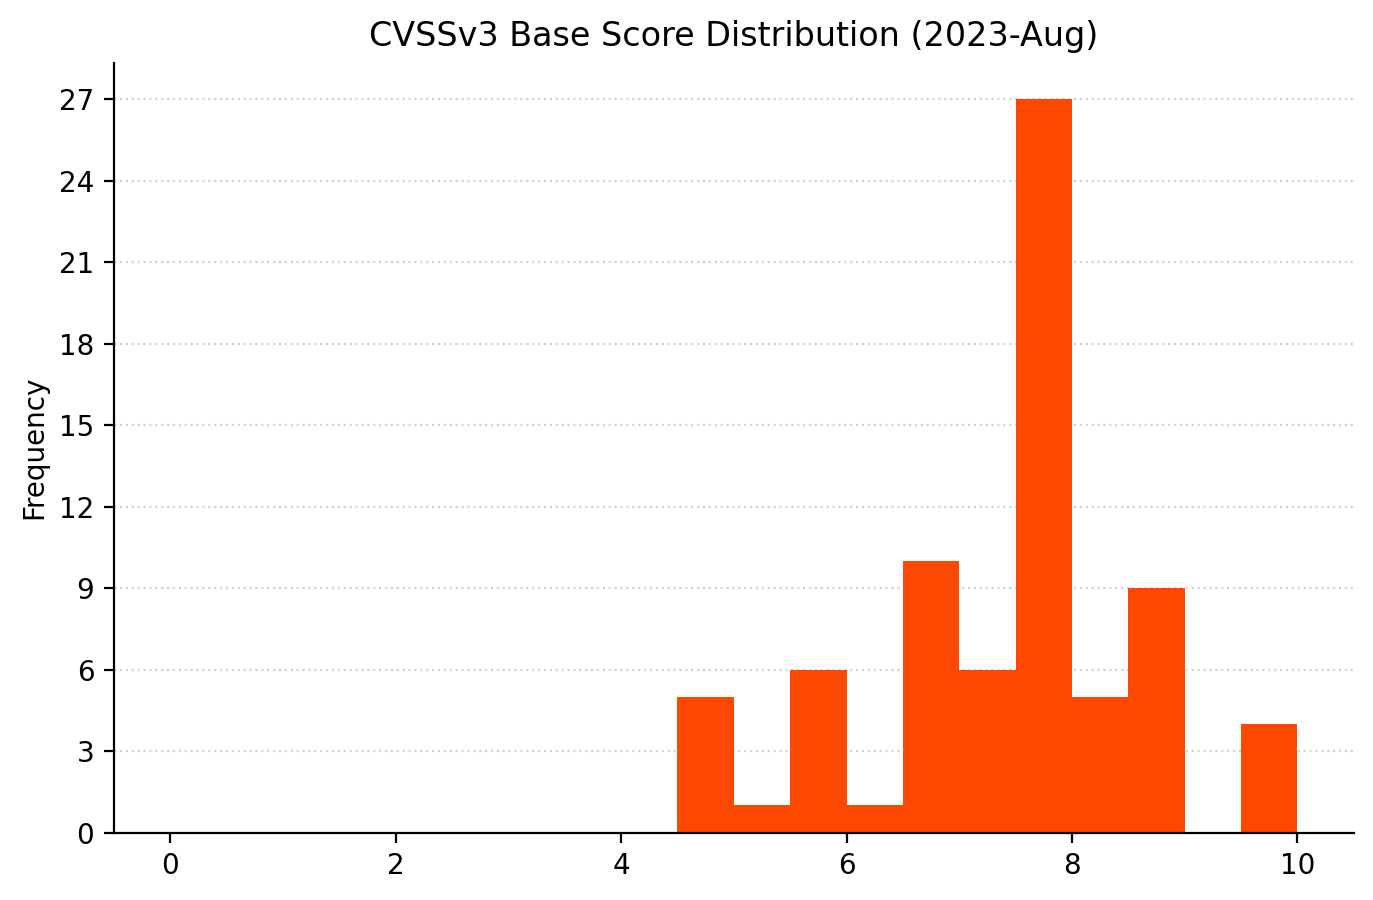 A bar chart showing the distribution of vulnerabilities by CVSSv3 risk score for Microsoft Patch Tuesday August 2023.